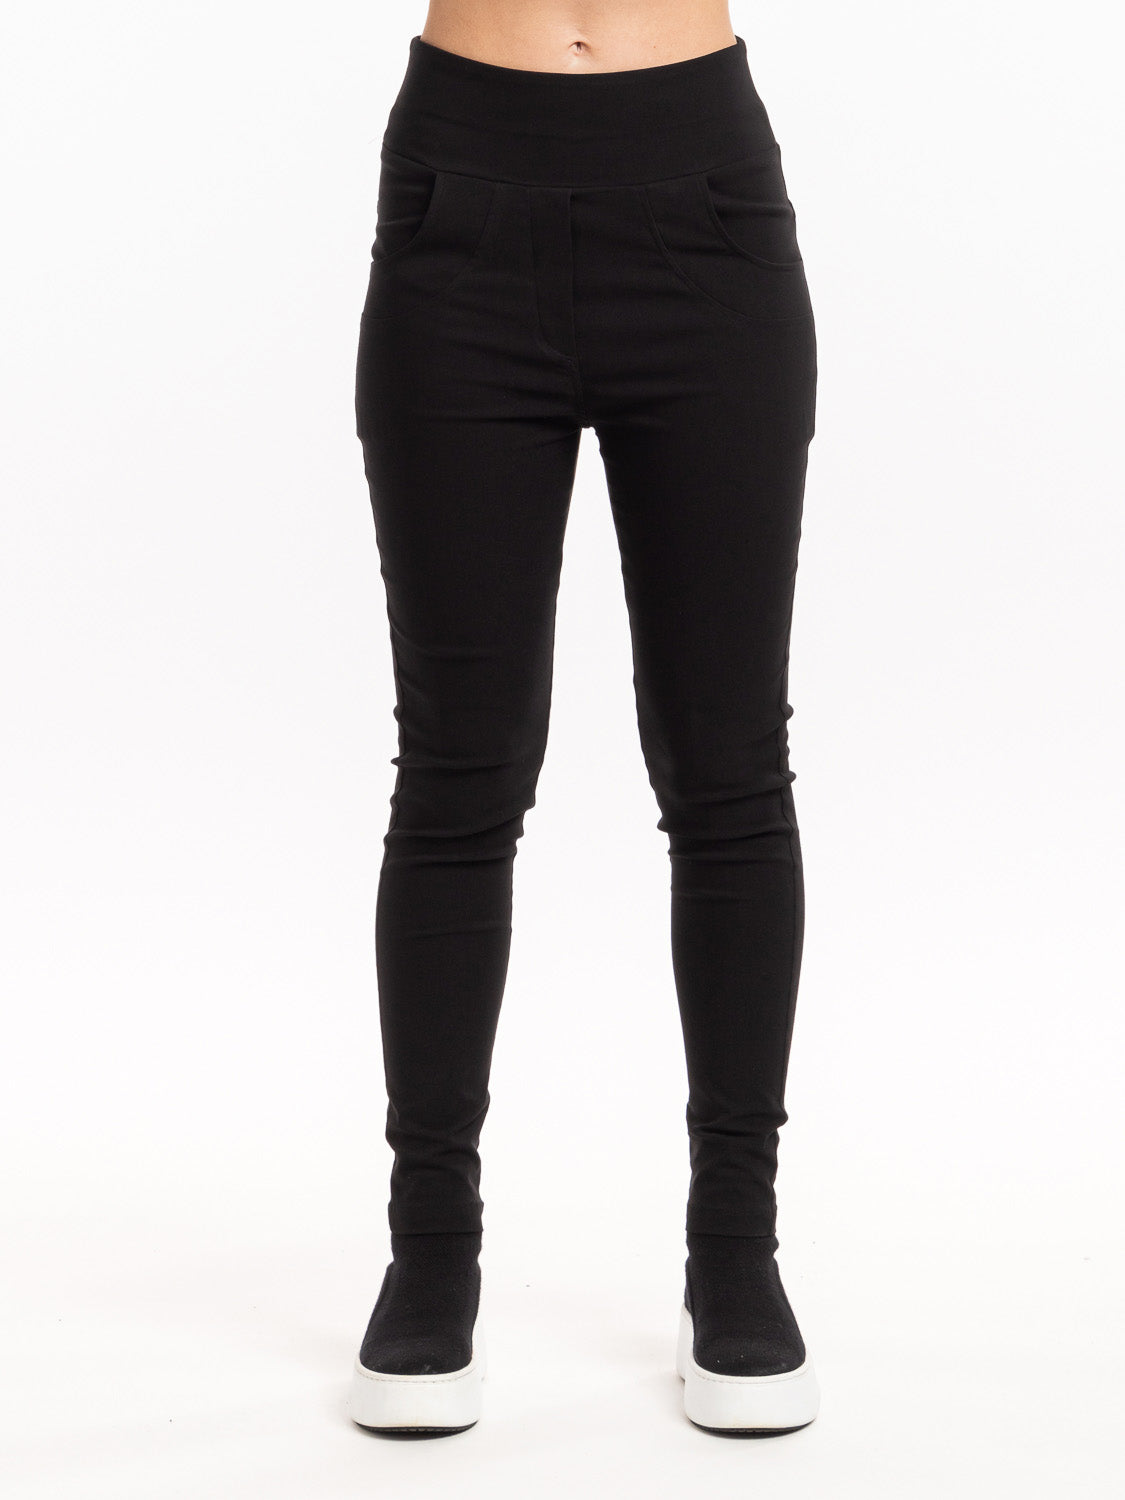 STYLE X LAB FROST PANT - BLACK - THE VOGUE STORE